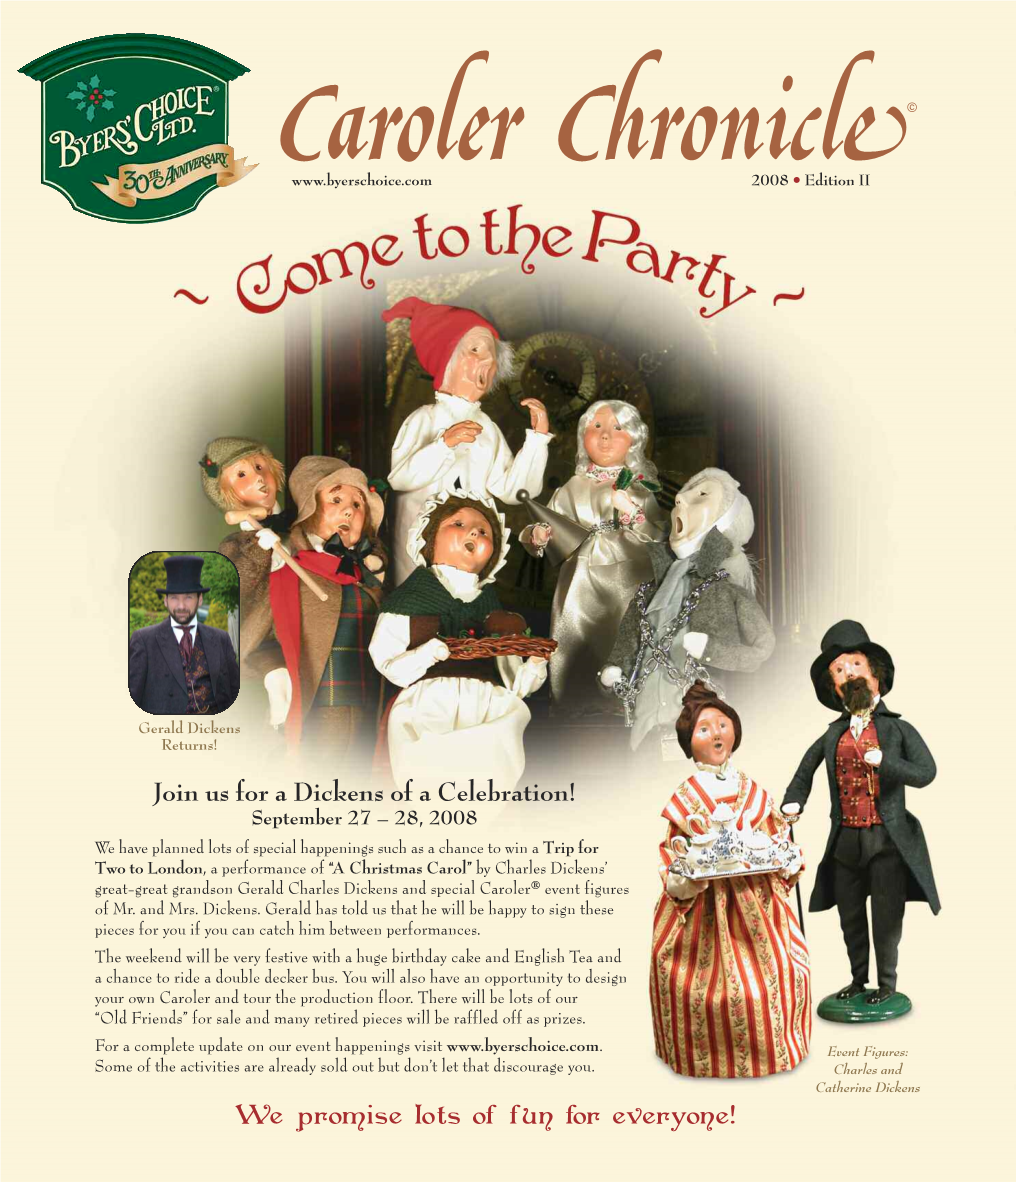 Join Us for a Dickens of a Celebration!